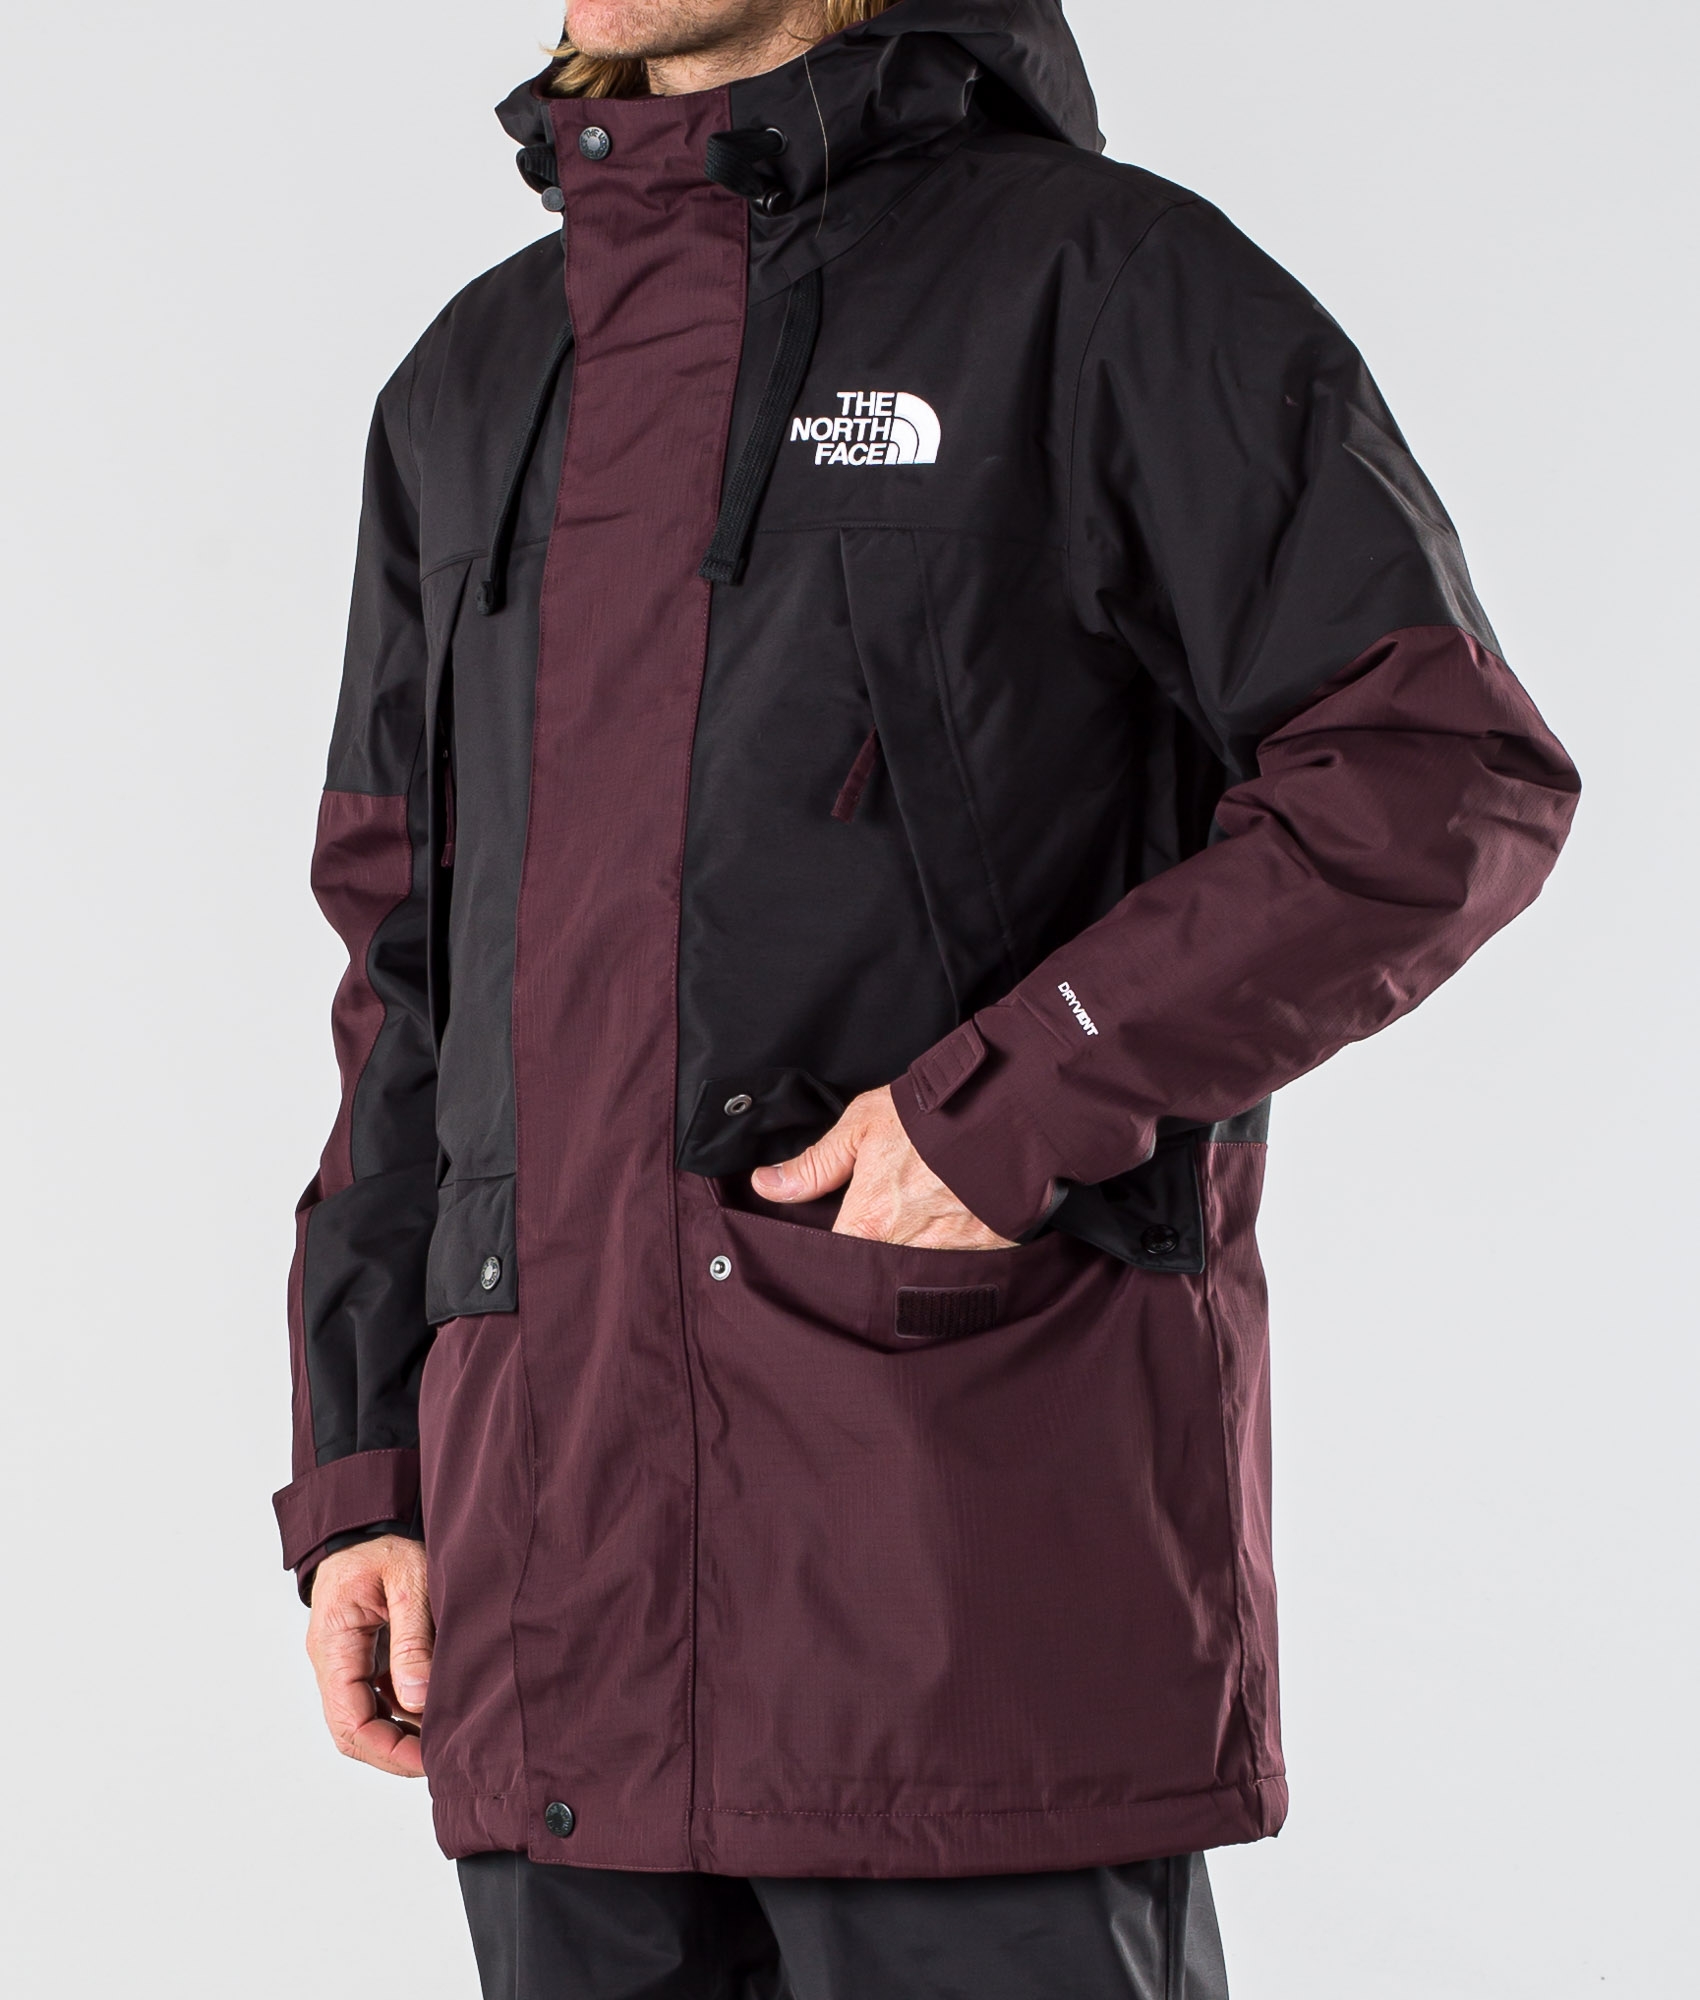 brown and black north face jacket